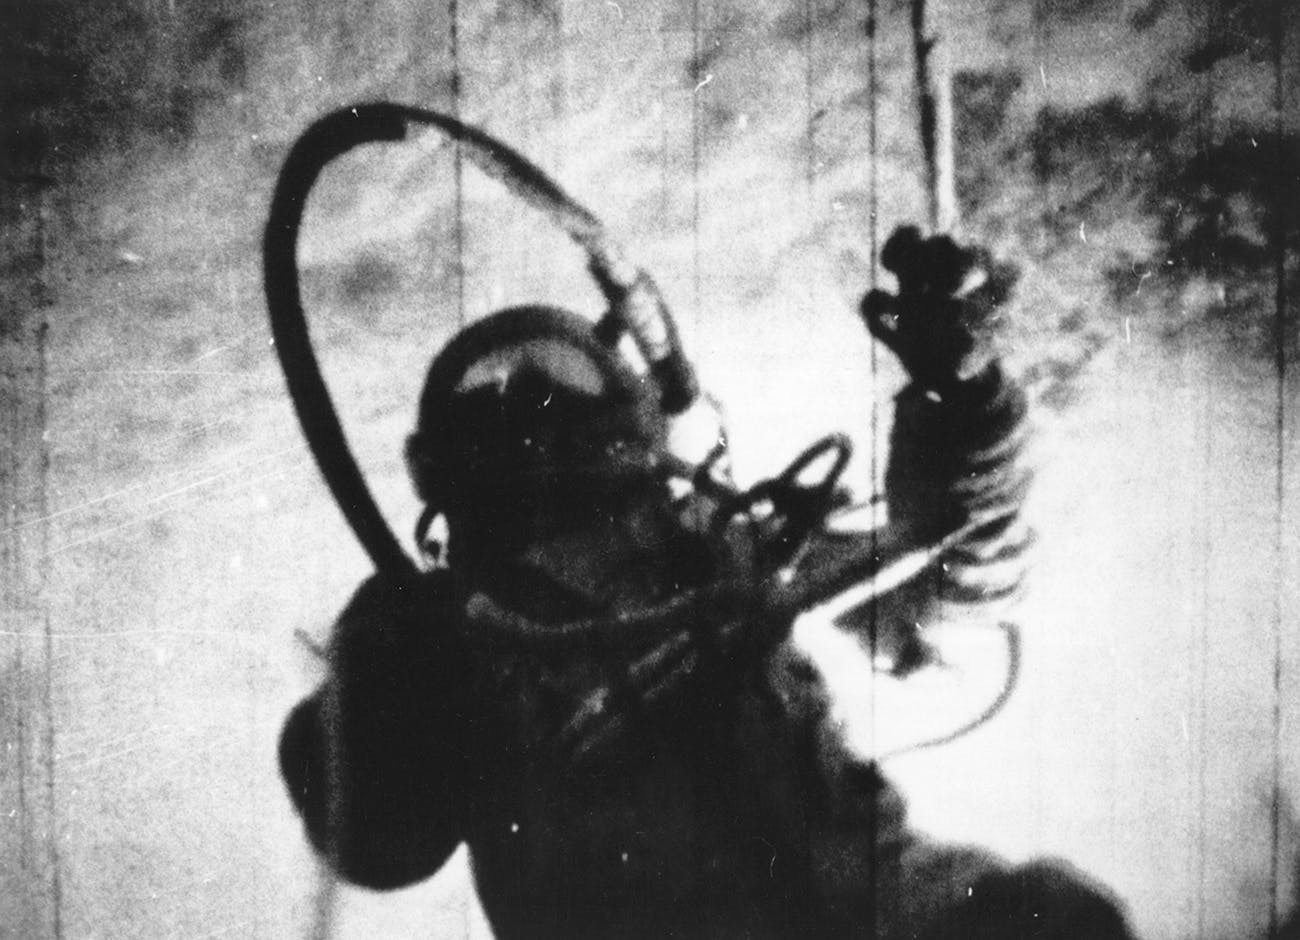 18th March 1965: Russian astronaut Alexei Leonov becomes the first man to walk in space on March 18, 1965.